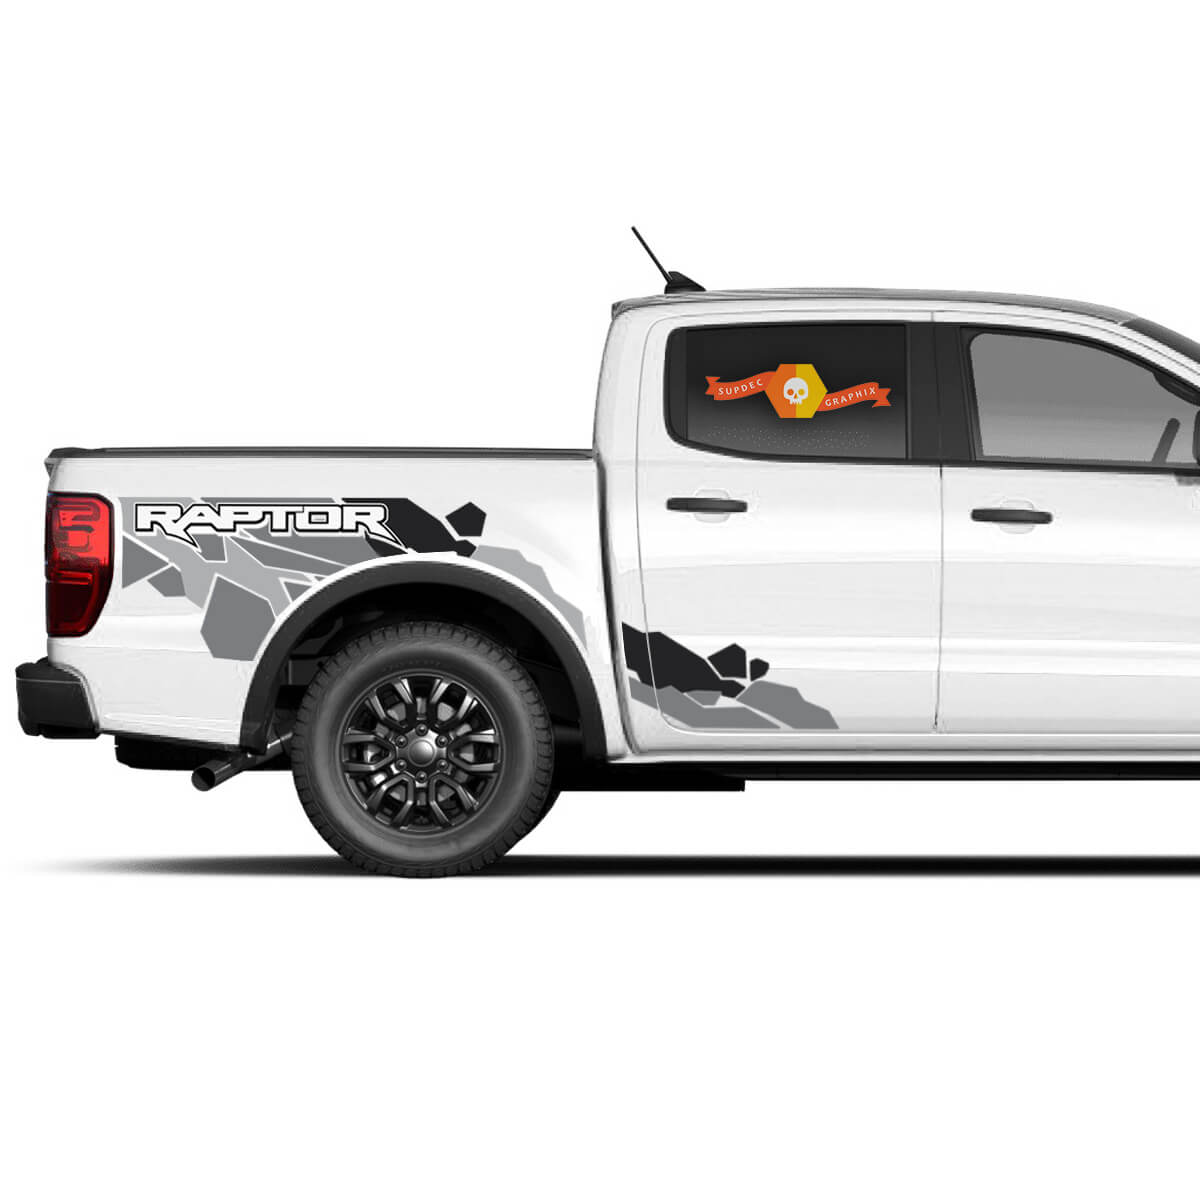 2022 F-150 RAPTOR and Other Years Camouflage Side Bed Doors SPLASH Decal Sticker Vinyl Graphics